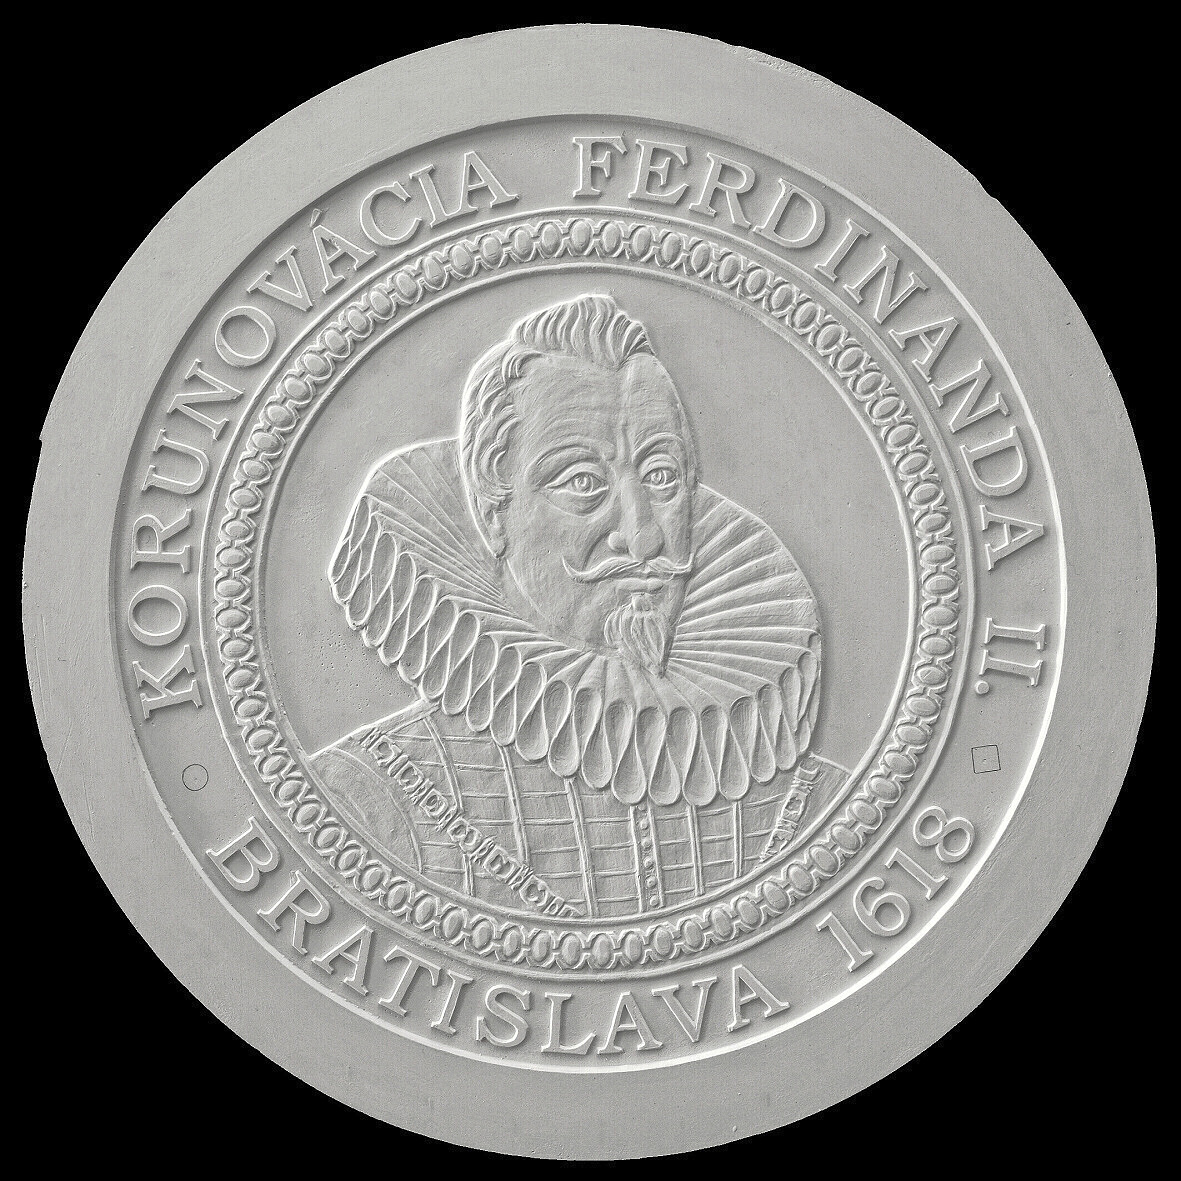 First prize and the design selected for the coin